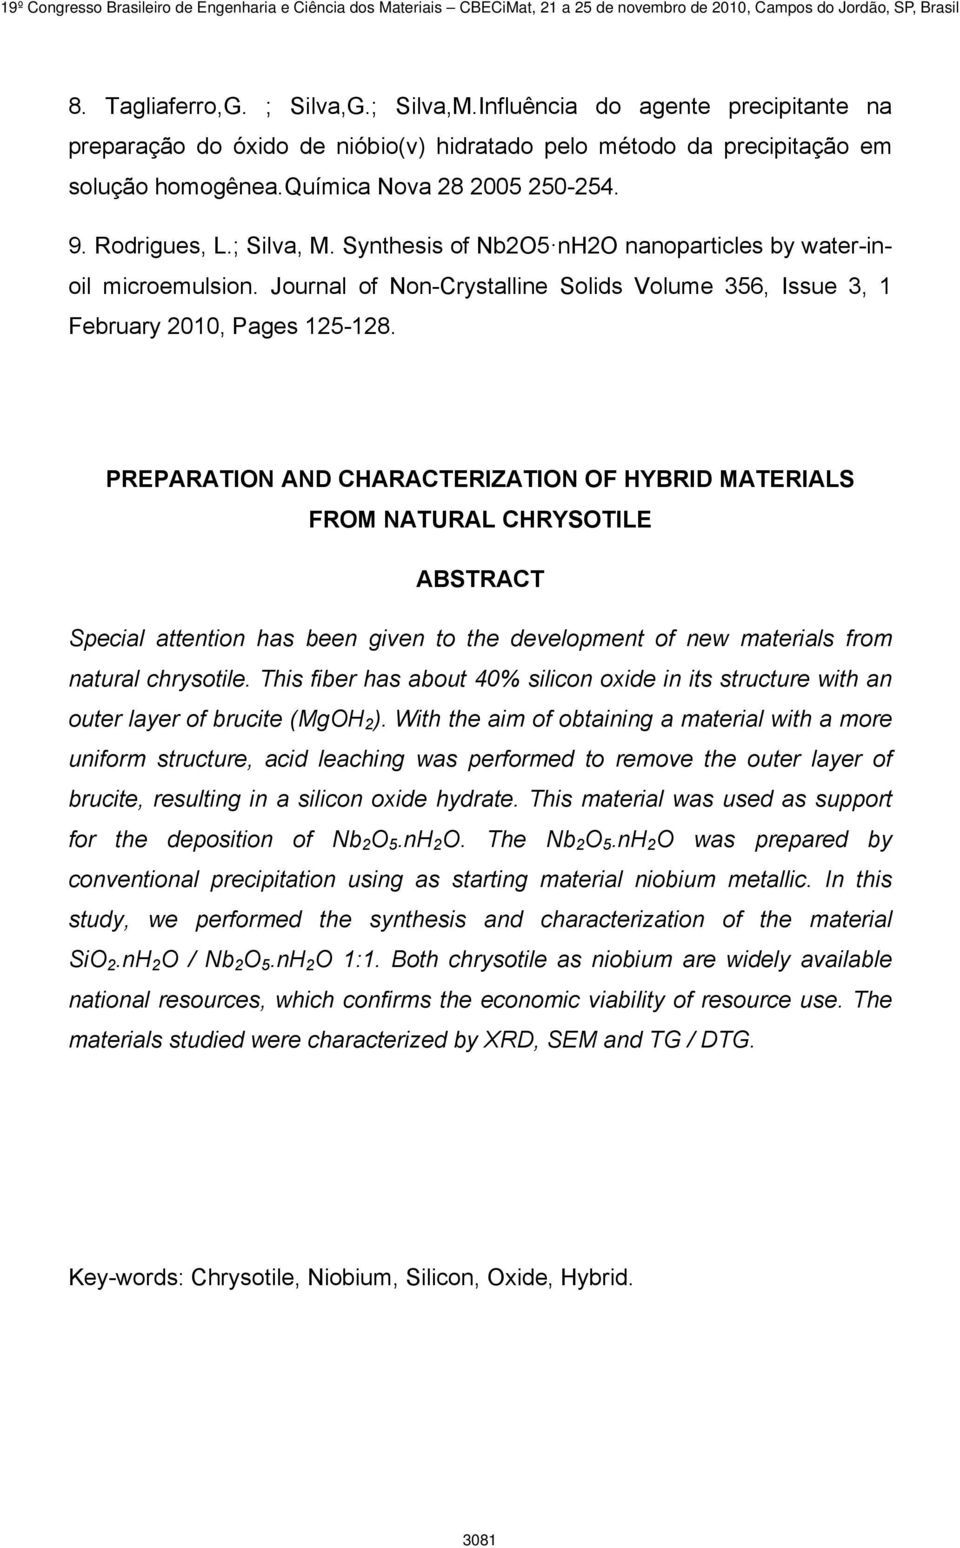 PREPARATION AND CHARACTERIZATION OF HYBRID MATERIALS FROM NATURAL CHRYSOTILE ABSTRACT Special attention has been given to the development of new materials from natural chrysotile.